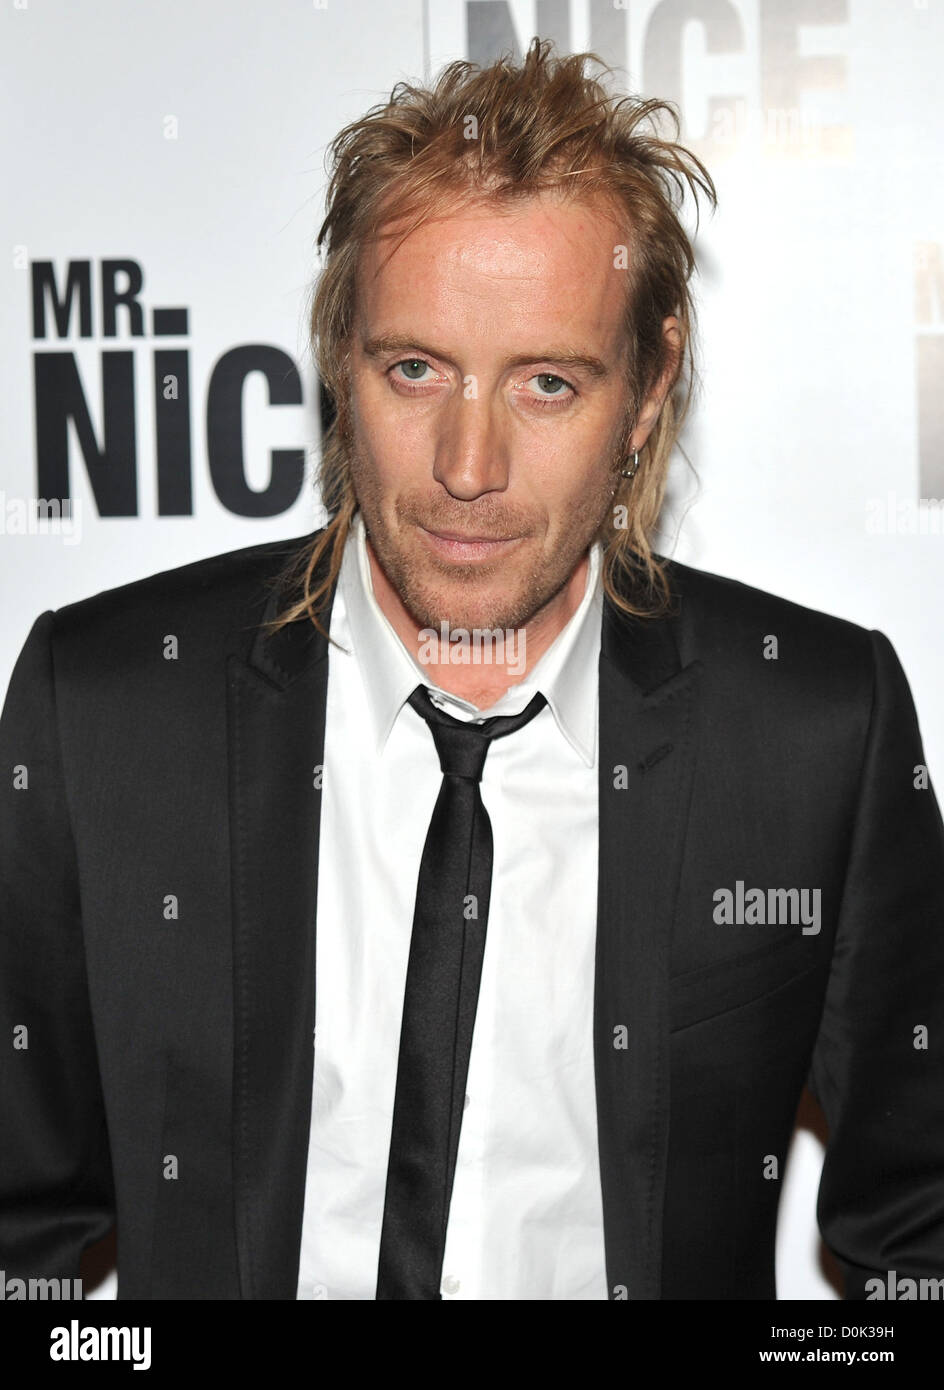 IFANS ARRESTED AT COMIC-CON Welsh actor RHYS IFANS has been arrested on suspicion of battery after an alleged altercation with Stock Photo